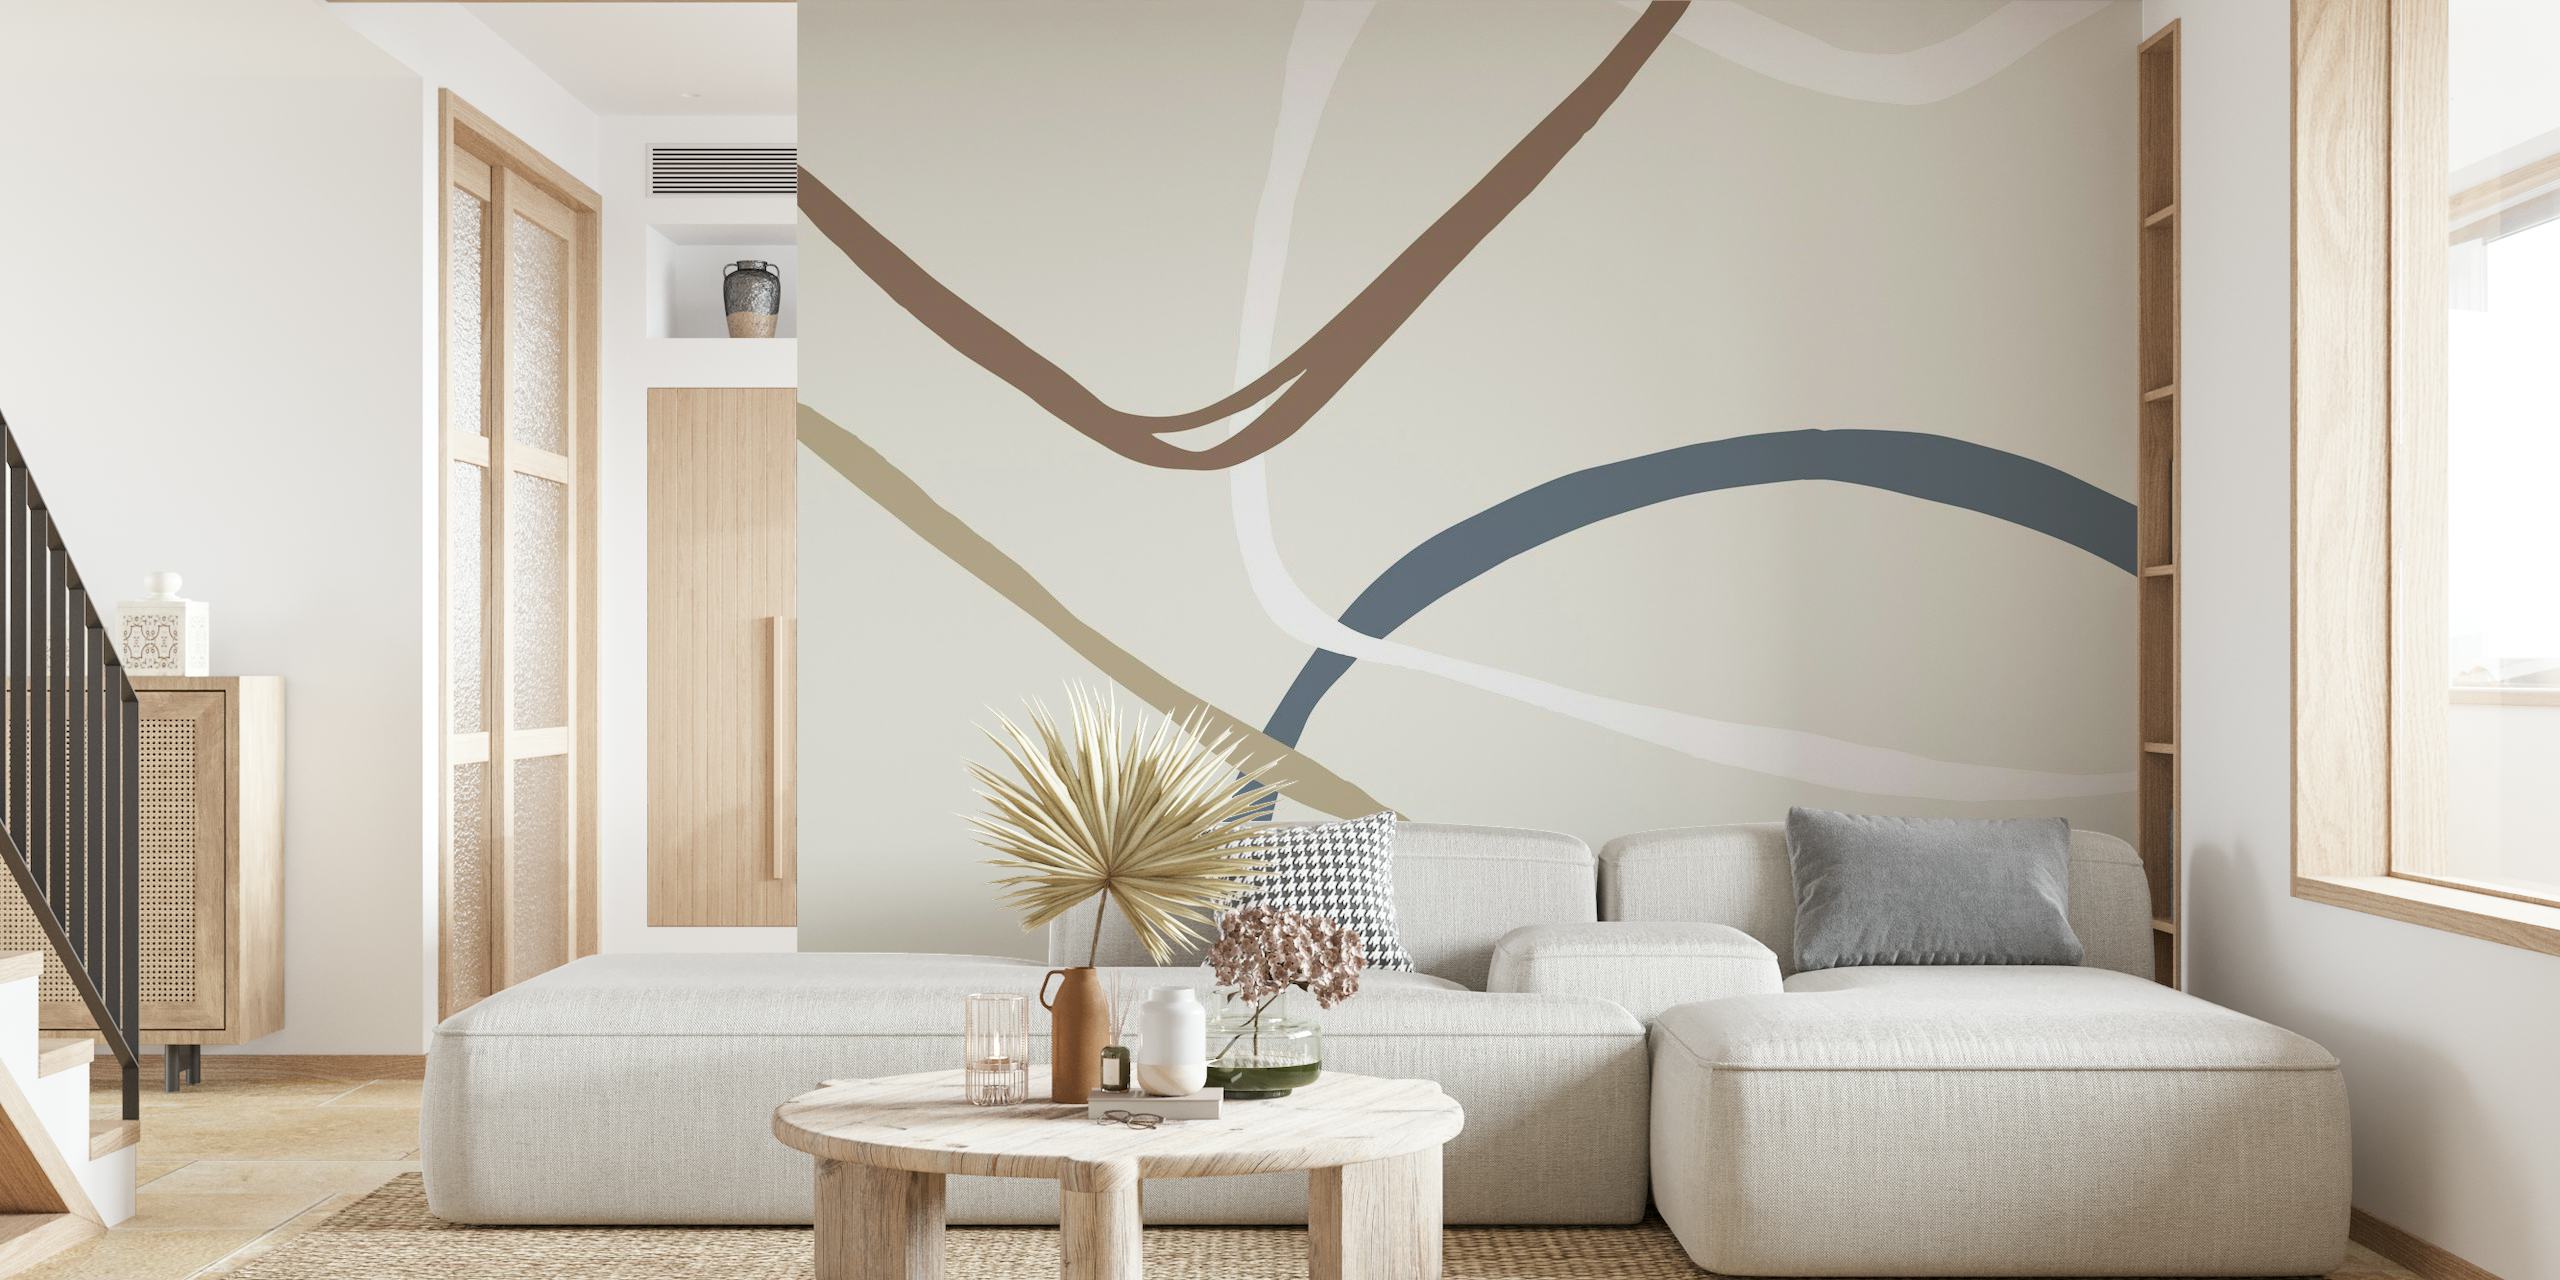 Abstract wall mural with smooth organic shapes in earthy tones